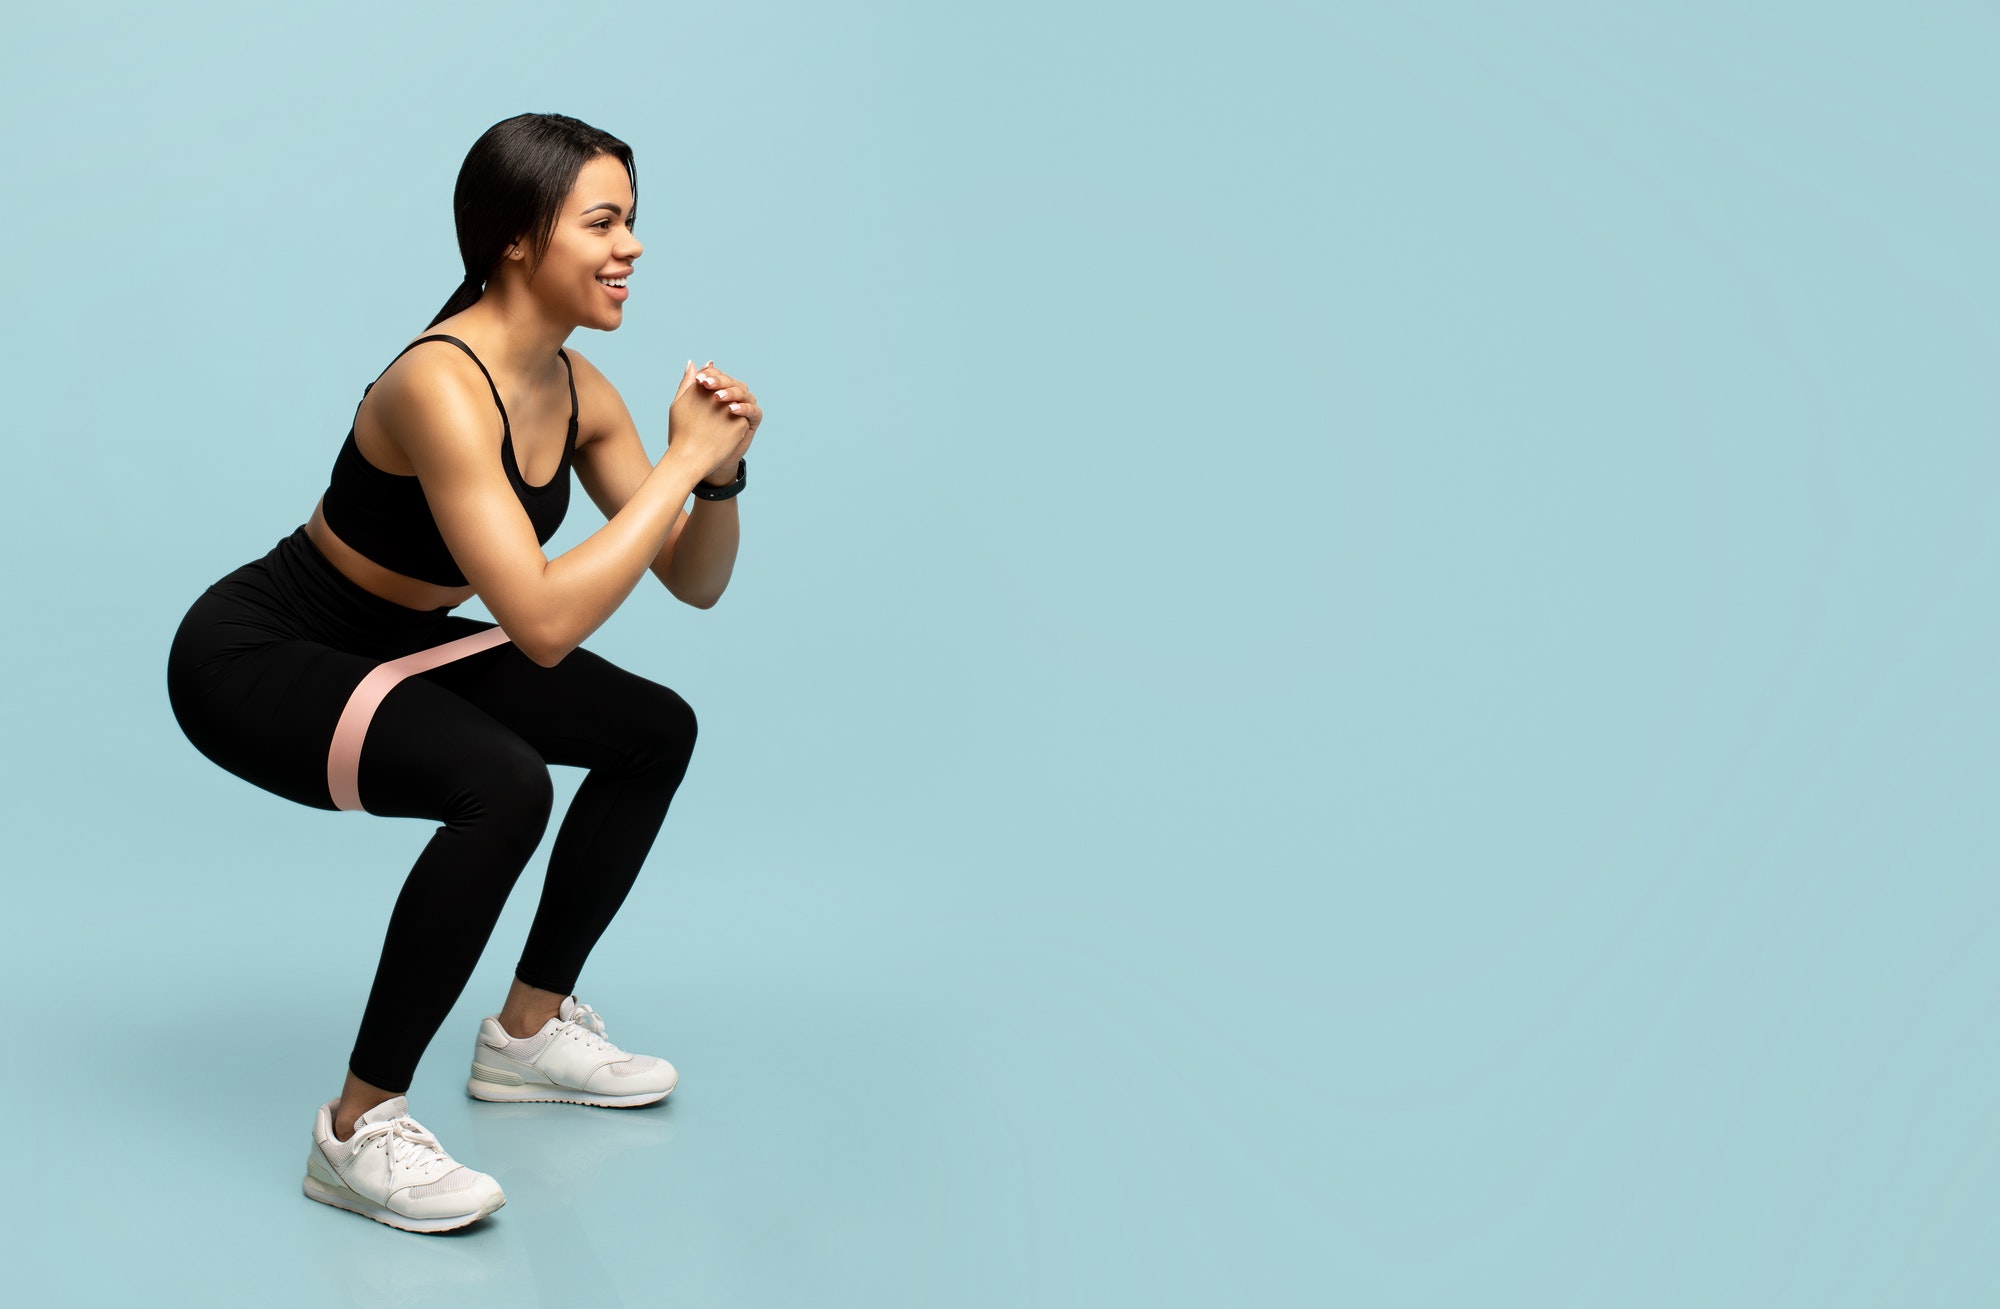 Training for glute muscles. Sporty black woman doing deep squat exercises with elastic bands, blue